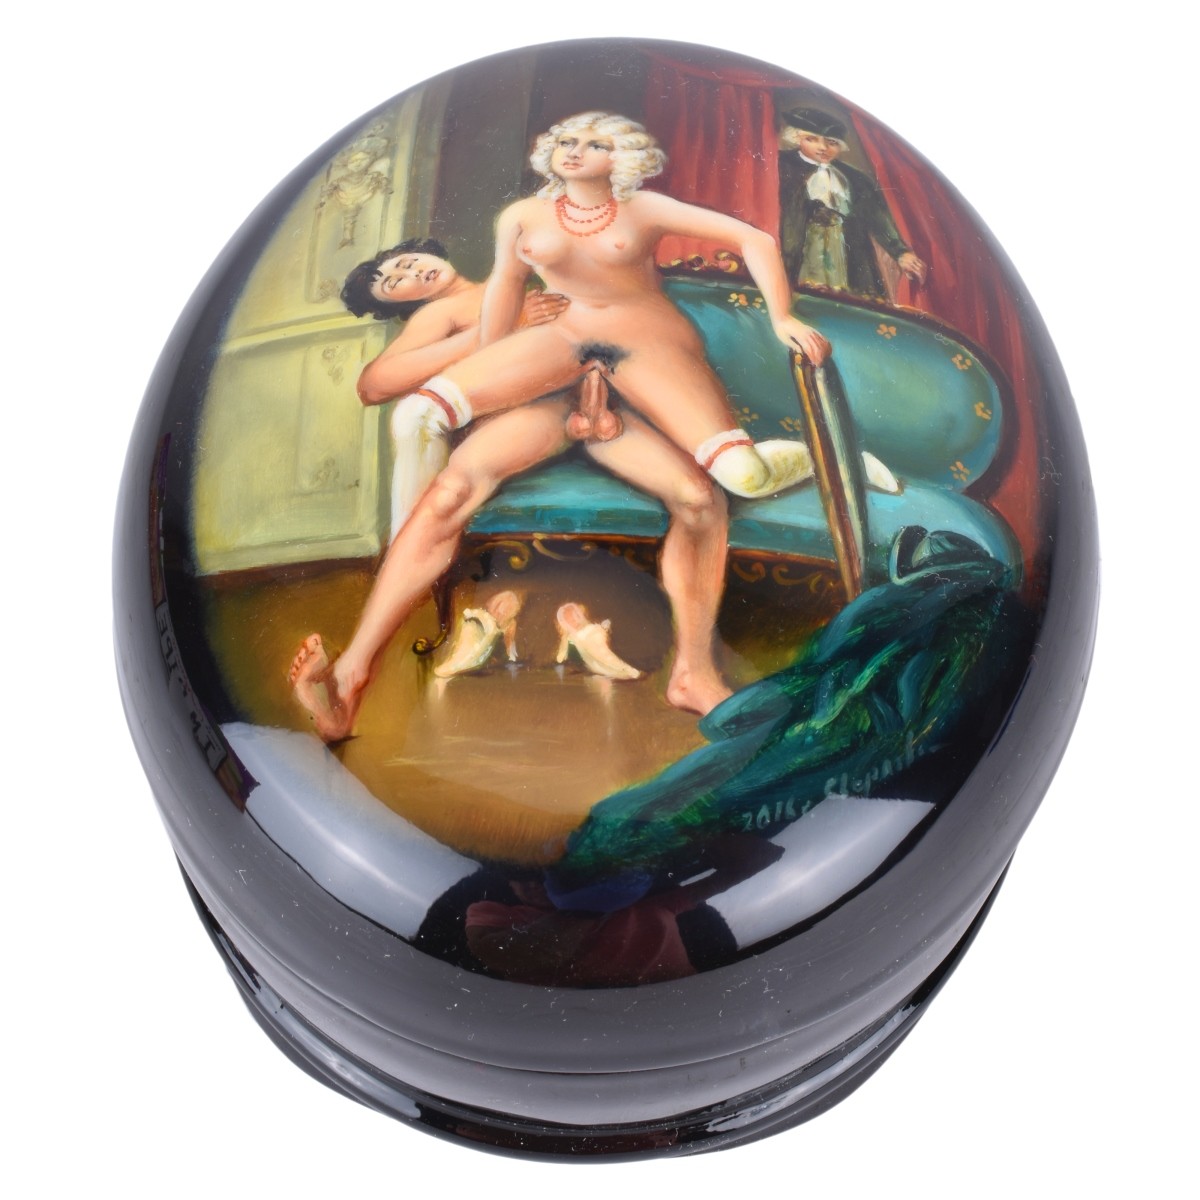 Russian Lacquer Hinged Box With Erotic Scene